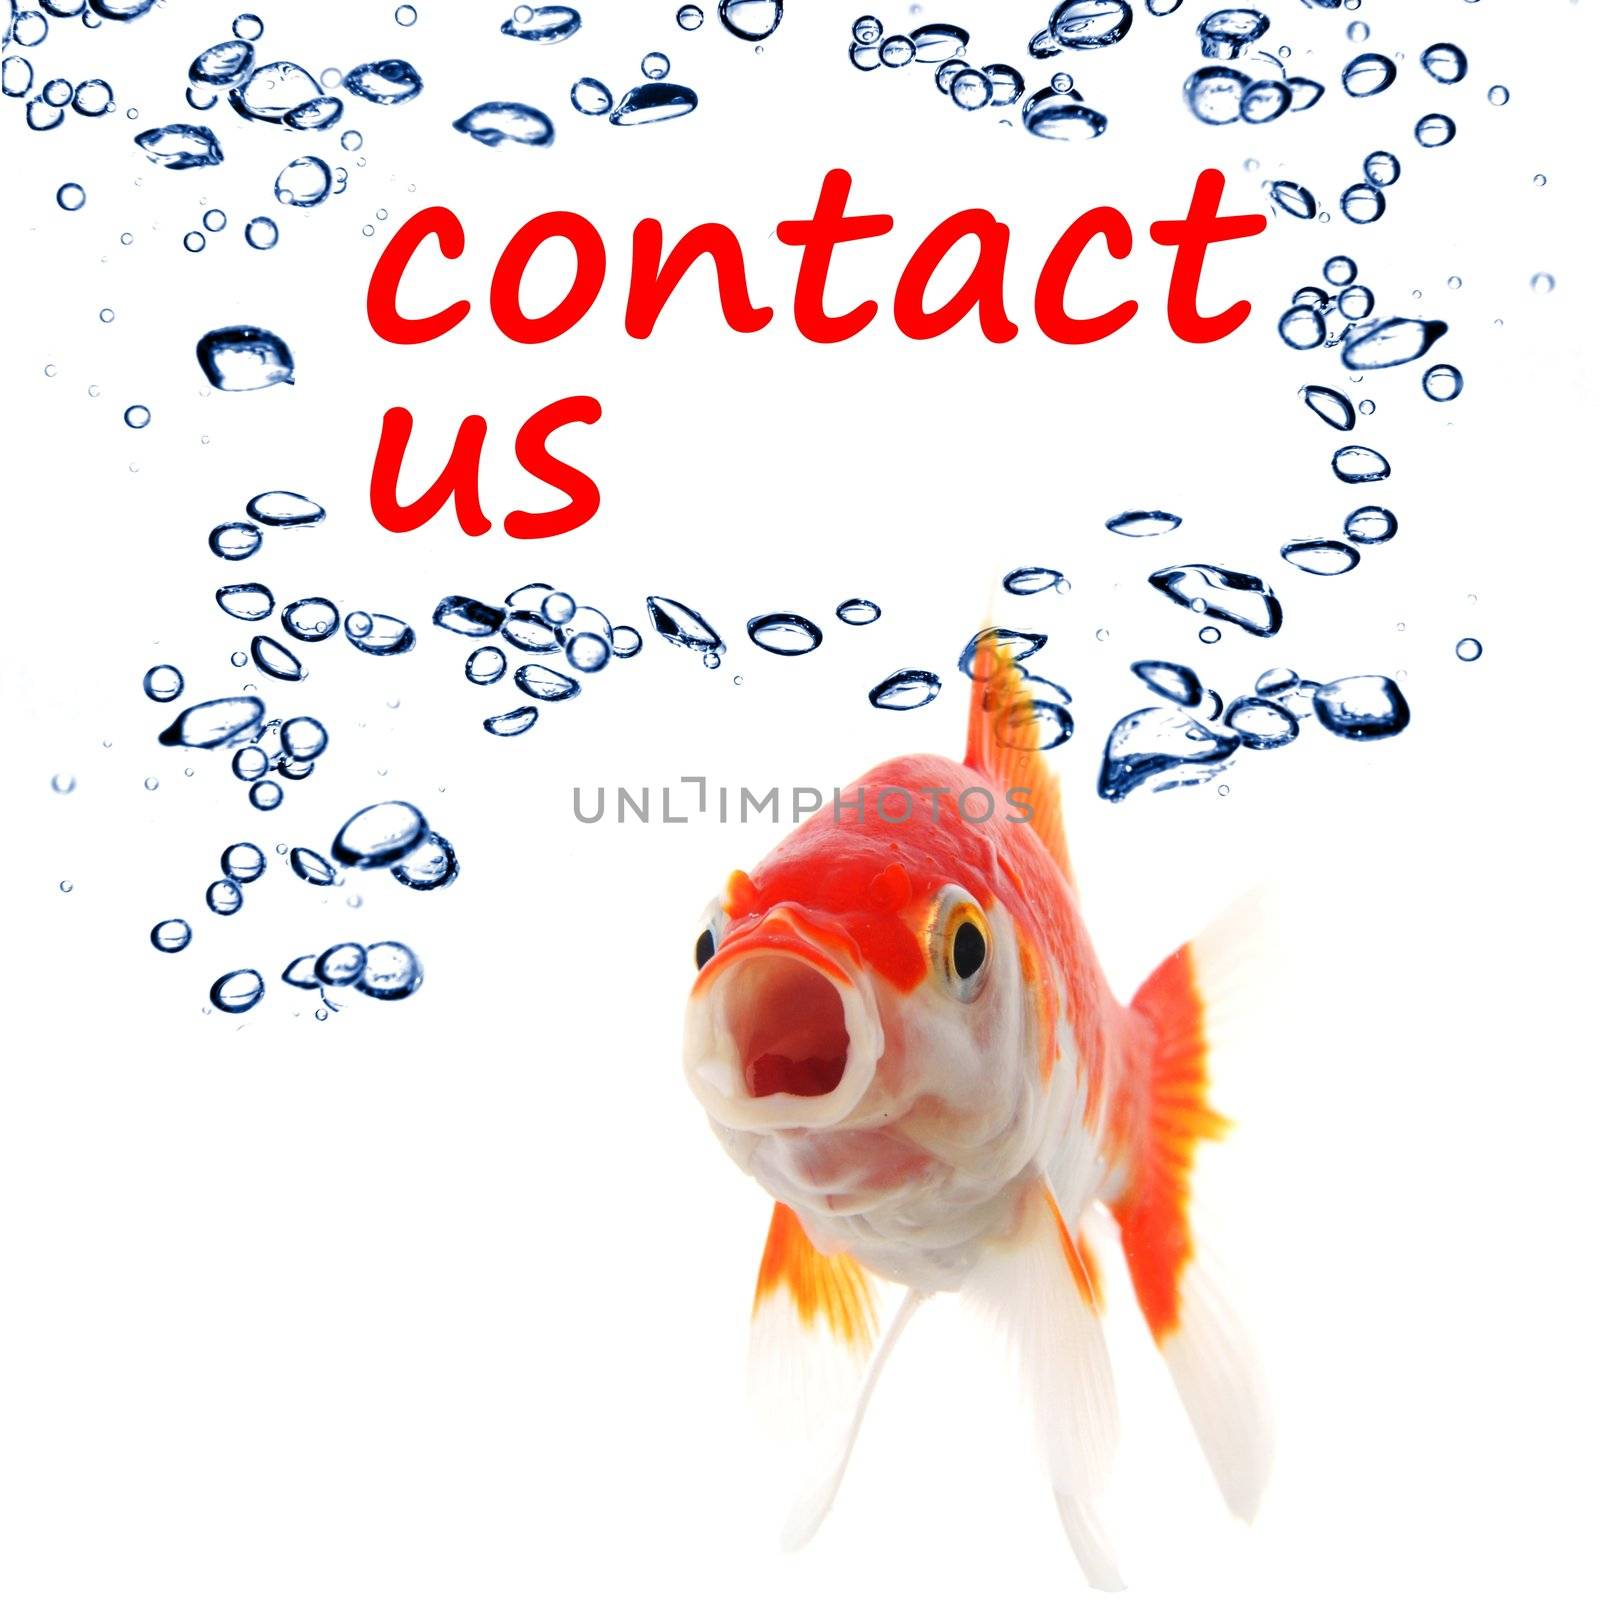 contact us concept with goldfish showing support service or email communication